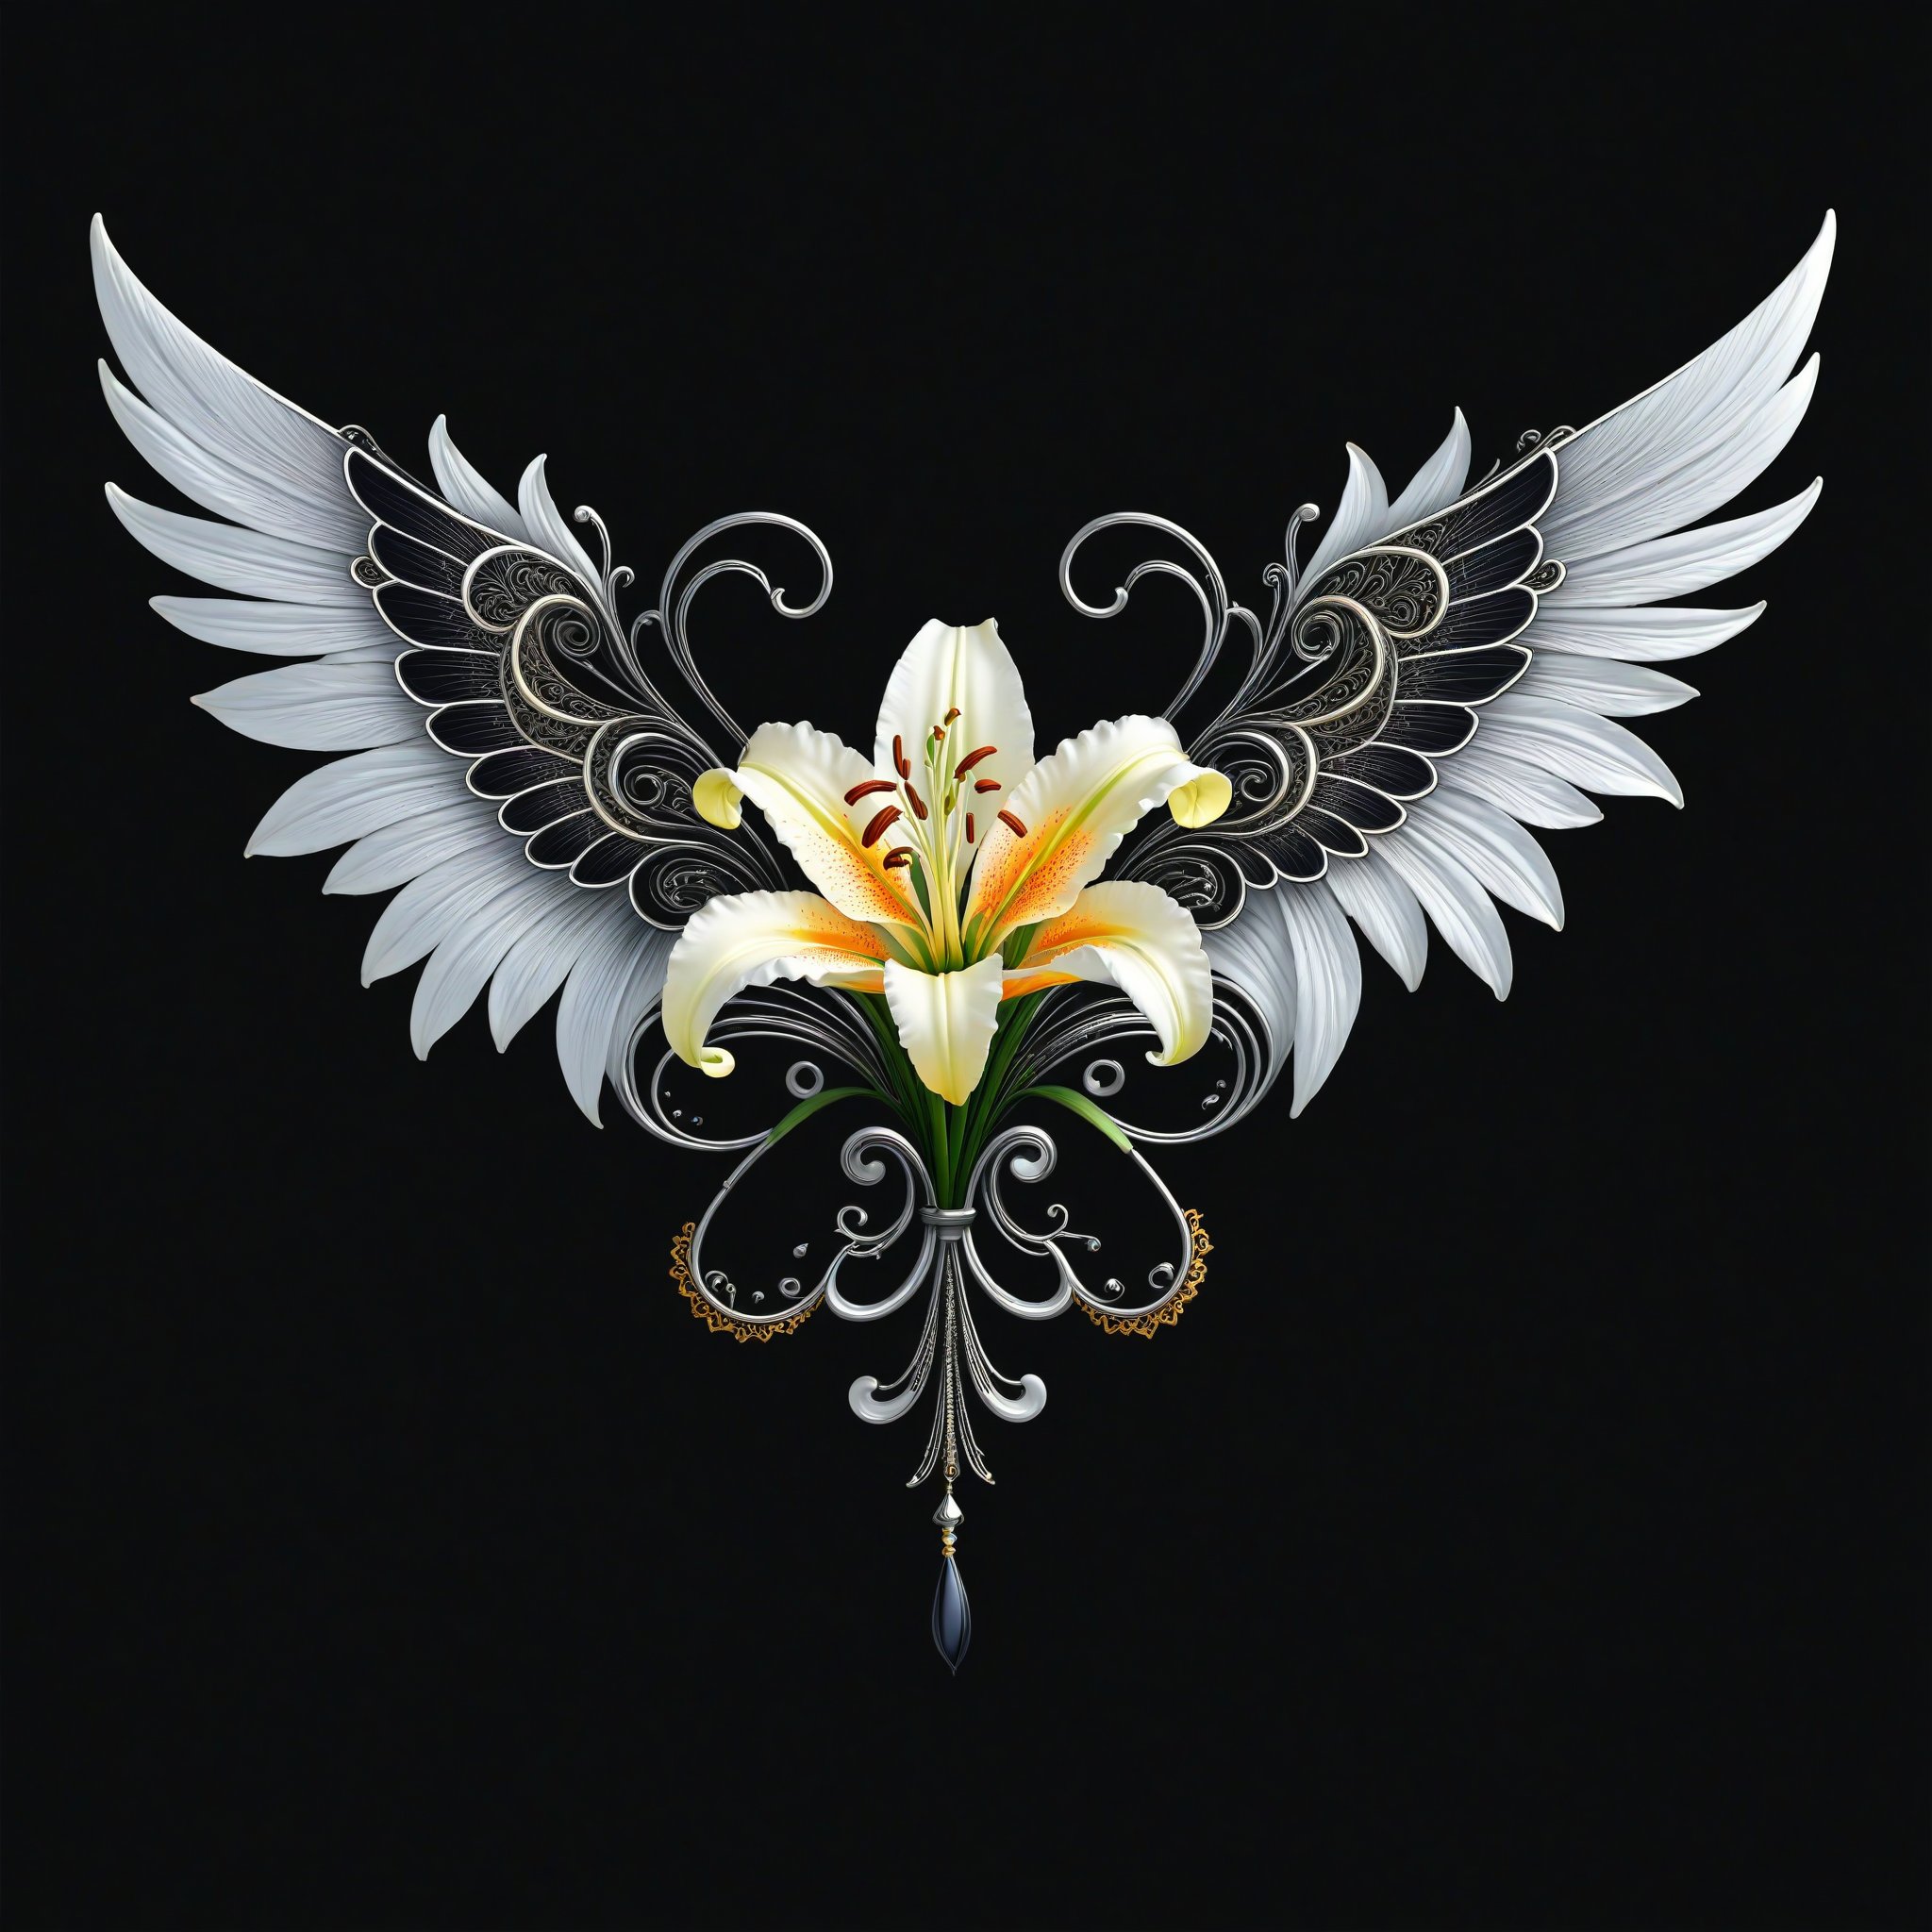 a Lily flower whit wing majestic with clasic ornament Mechanical lines Elegance T-shirt design, BLACK BACKGROUND